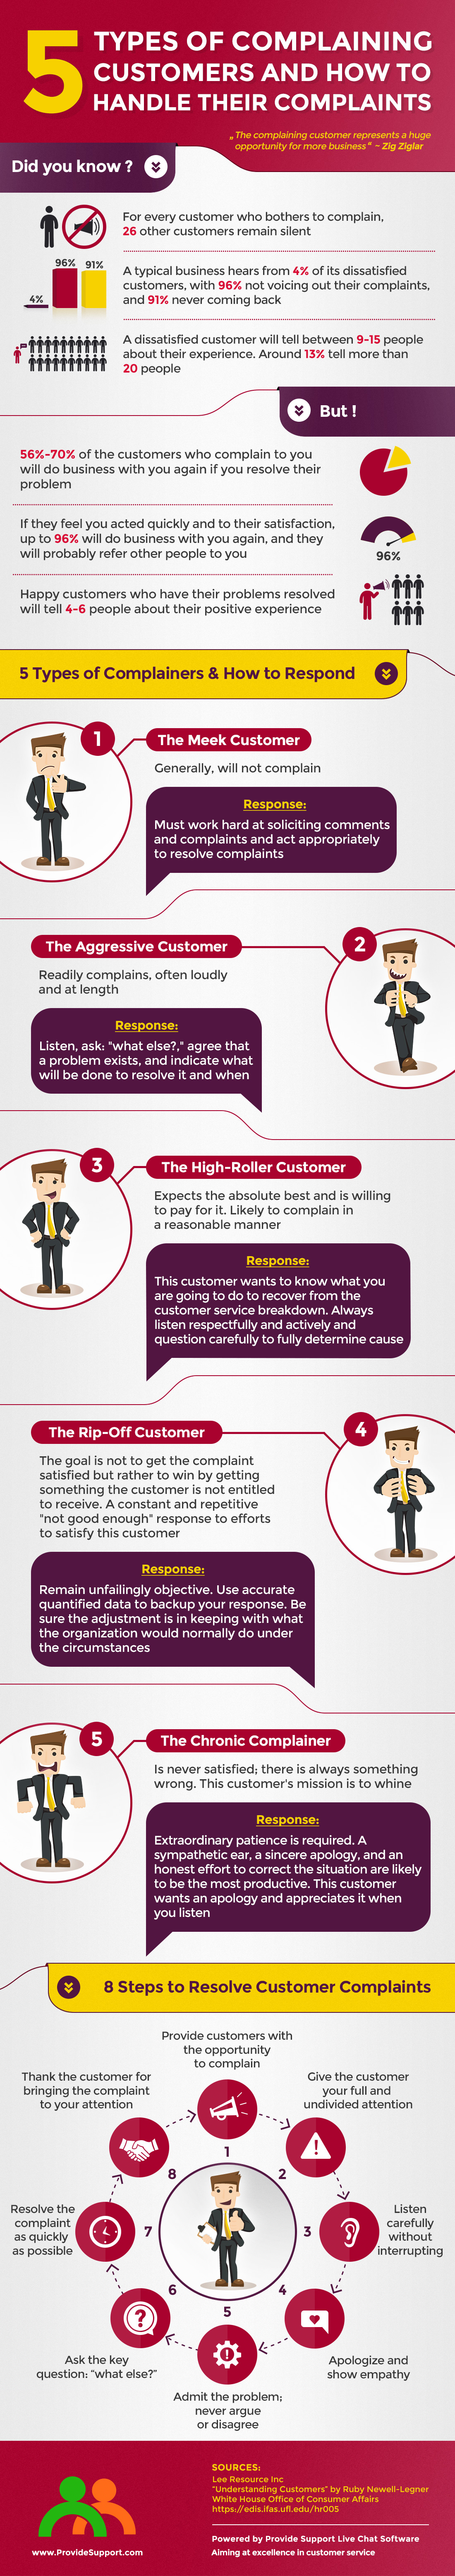 5 Types of Complaining Customers And How to Handle Their Complaints [Inforgraphic from Provide Support]